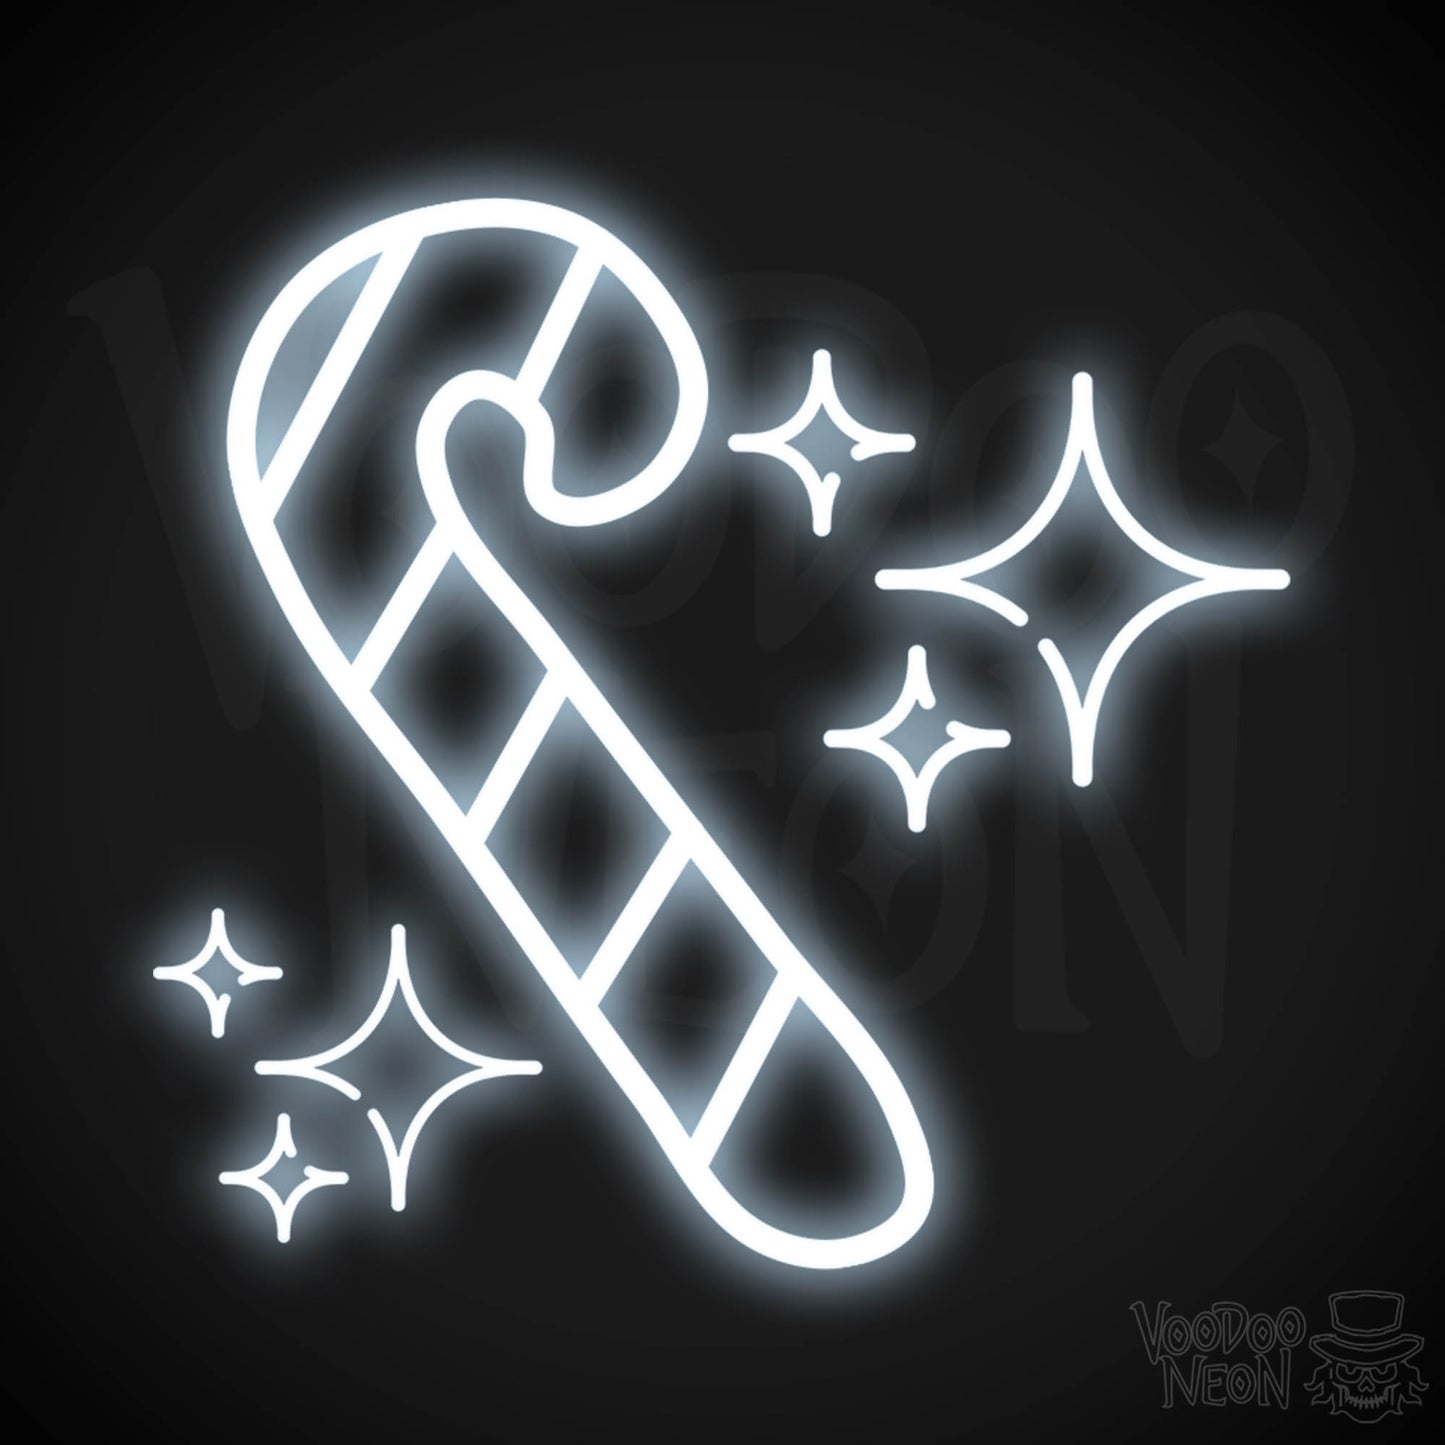 Neon Candy Cane Sign - Neon Christmas Candy Cane Wall Art - LED Sign - Color Cool White